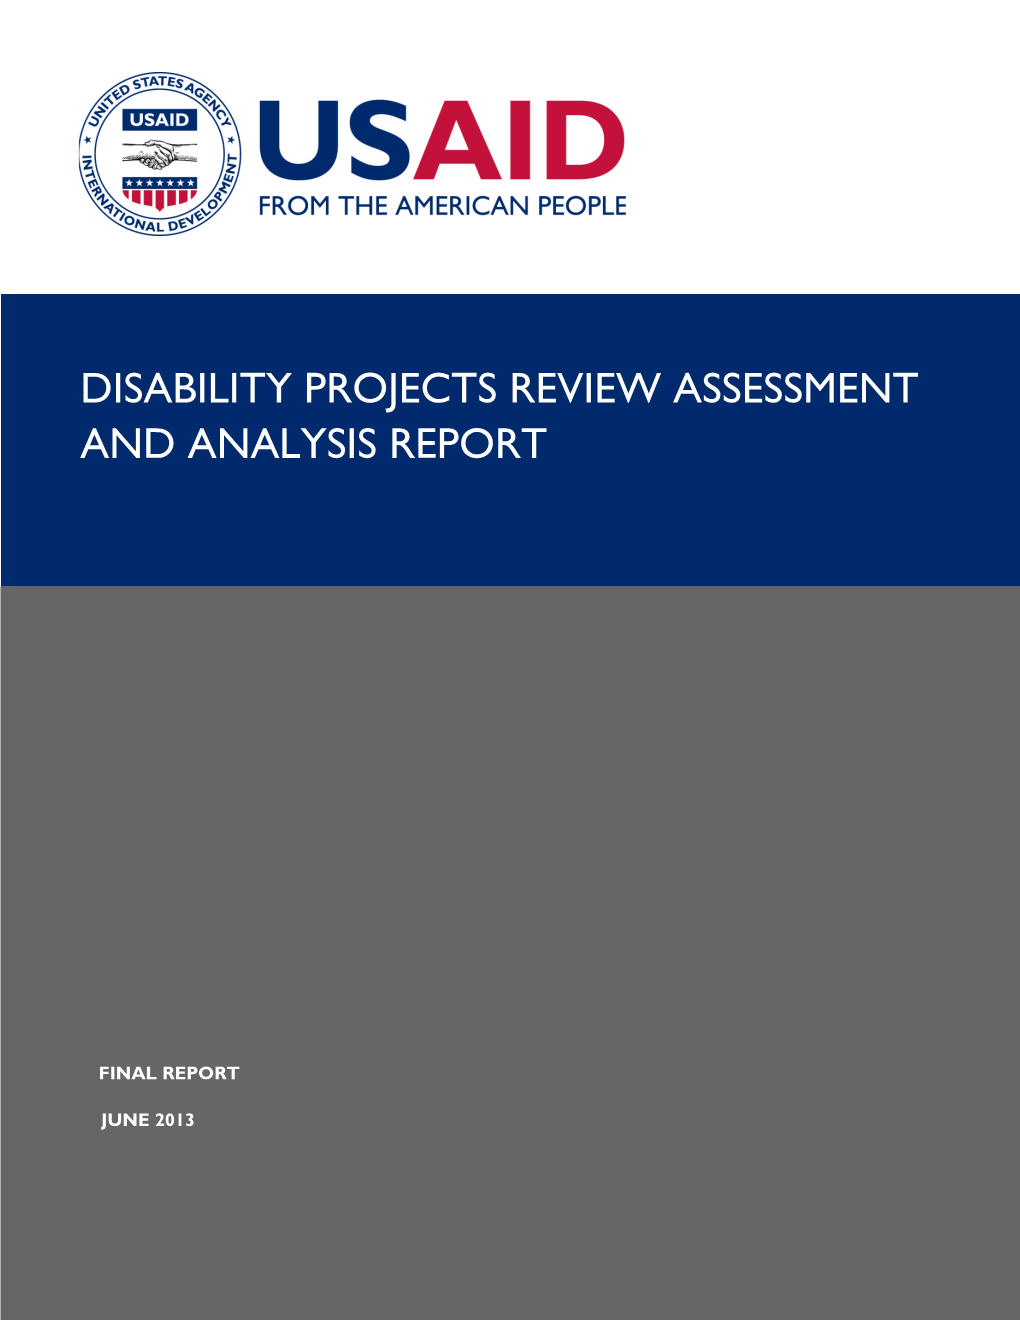 Disability Projects Review Assessment and Analysis Report